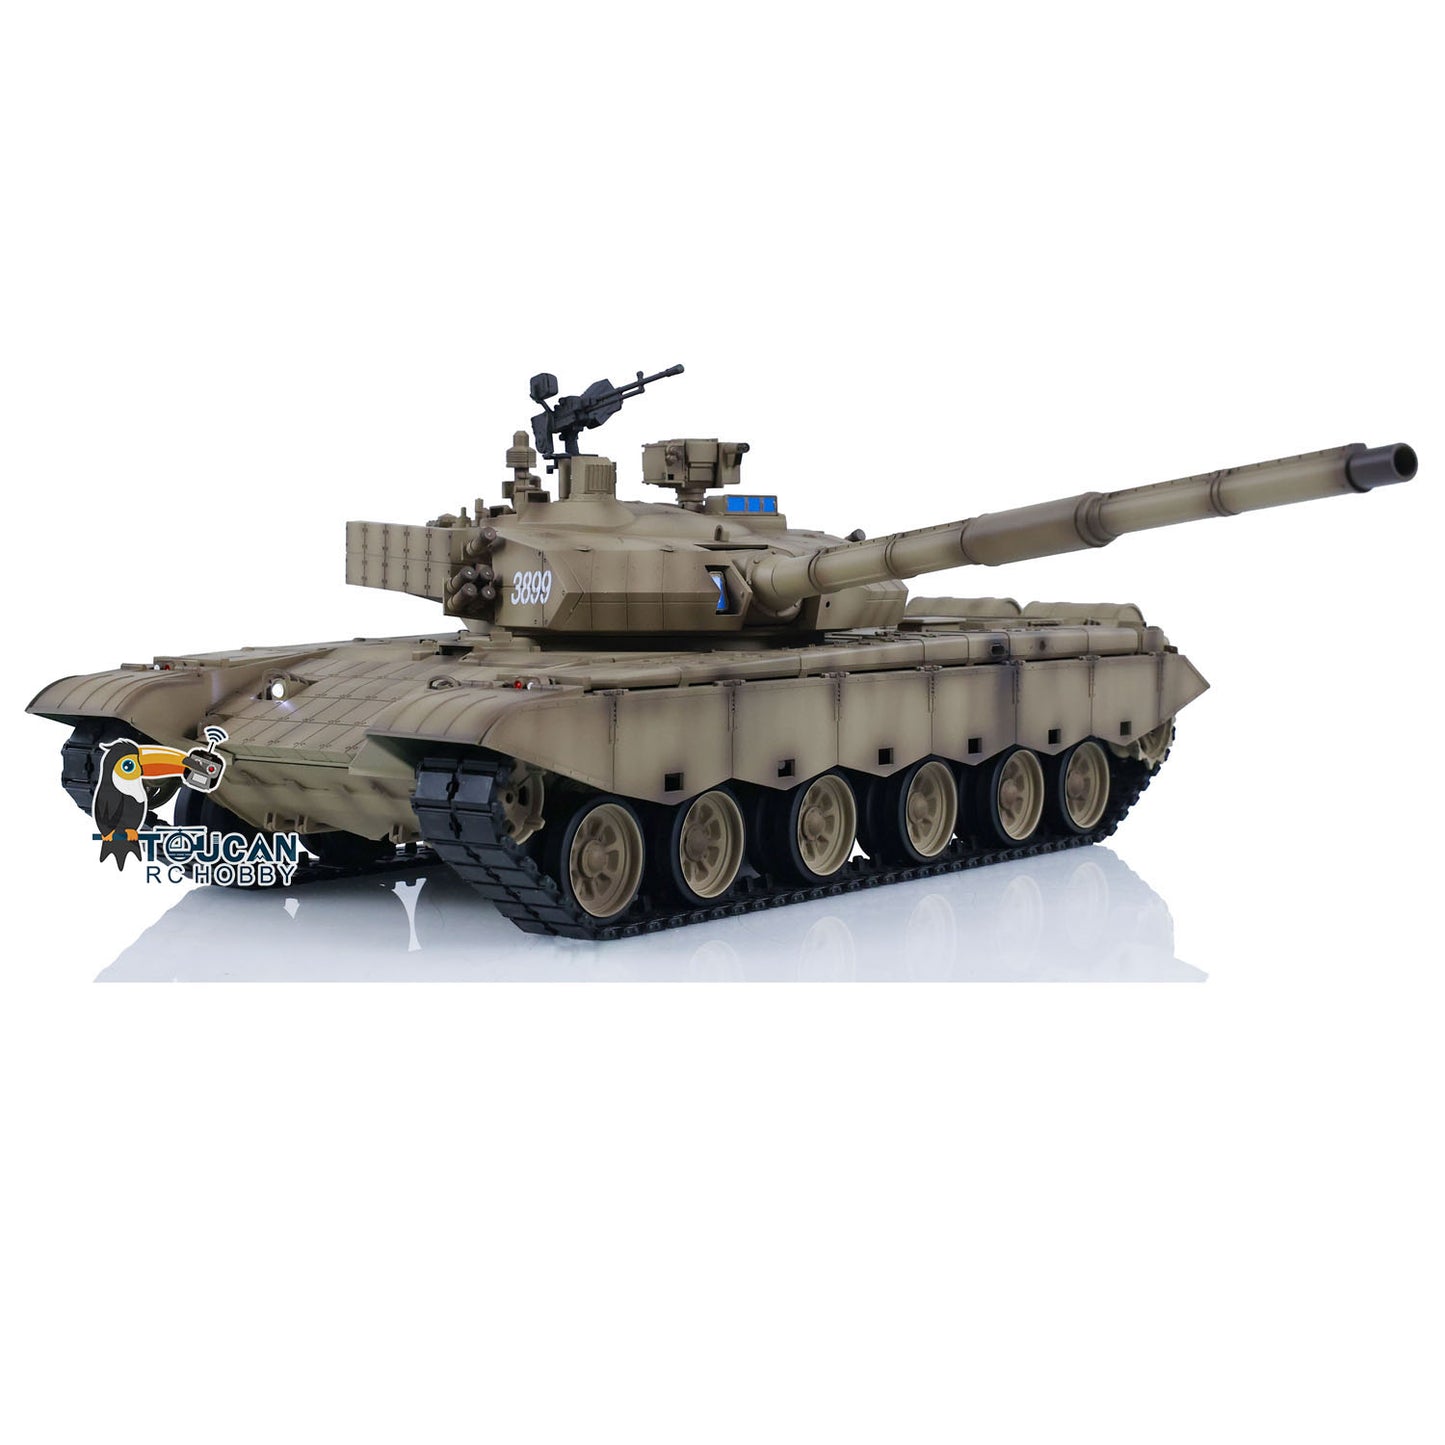 IN STOCK Henglong 1/16 FPV 7.0 Chinese 99A RC Tank Model 3899A 360 Turret Steel Gearbox Radio Controlled Military Vehicle Hobby DIY Toy Car